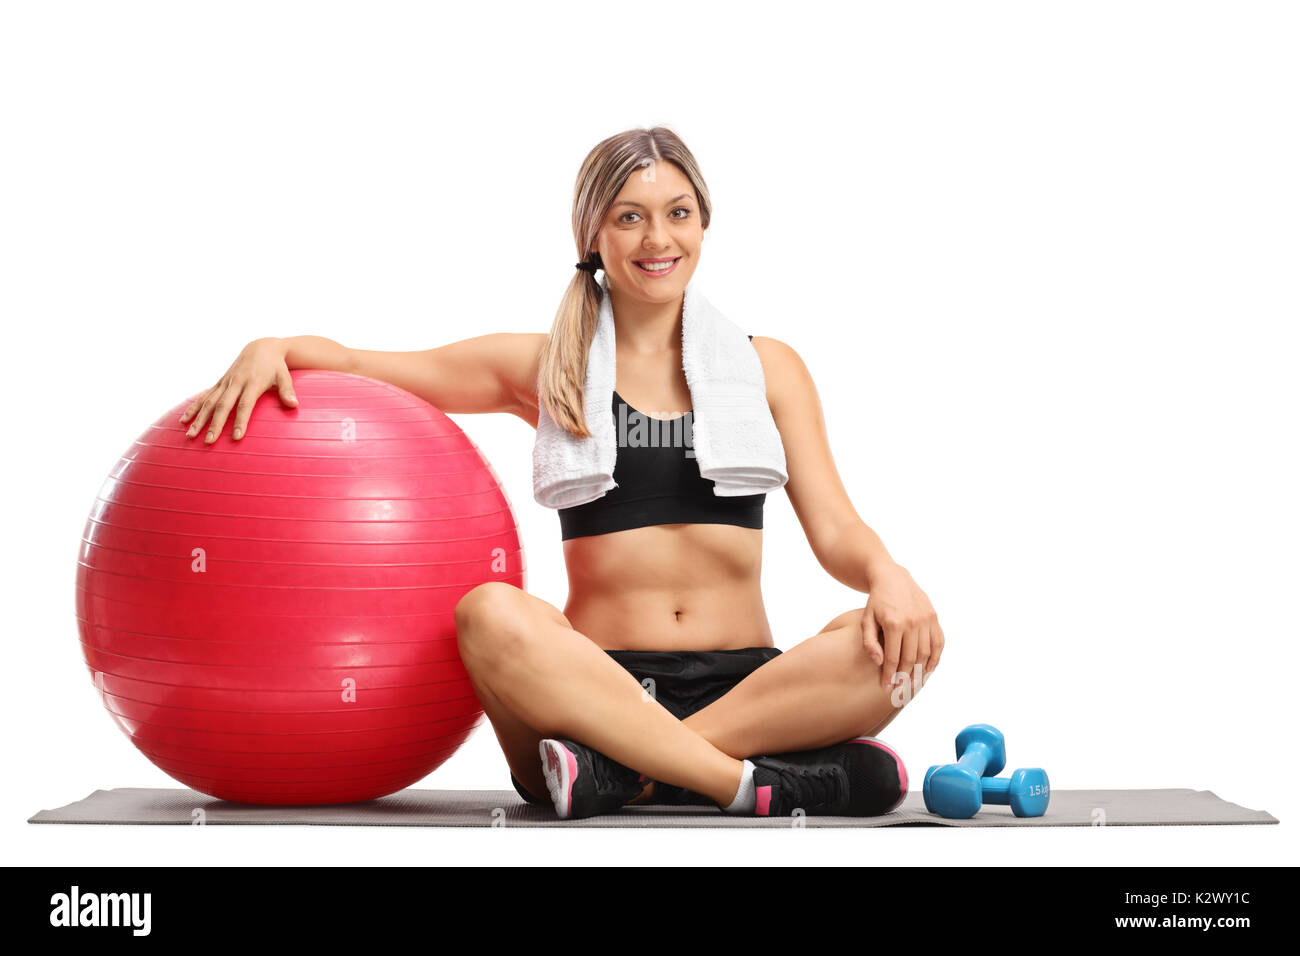 Young woman with a pilates ball and dumbbells sitting on an exercise mat isolated on white background Stock Photo